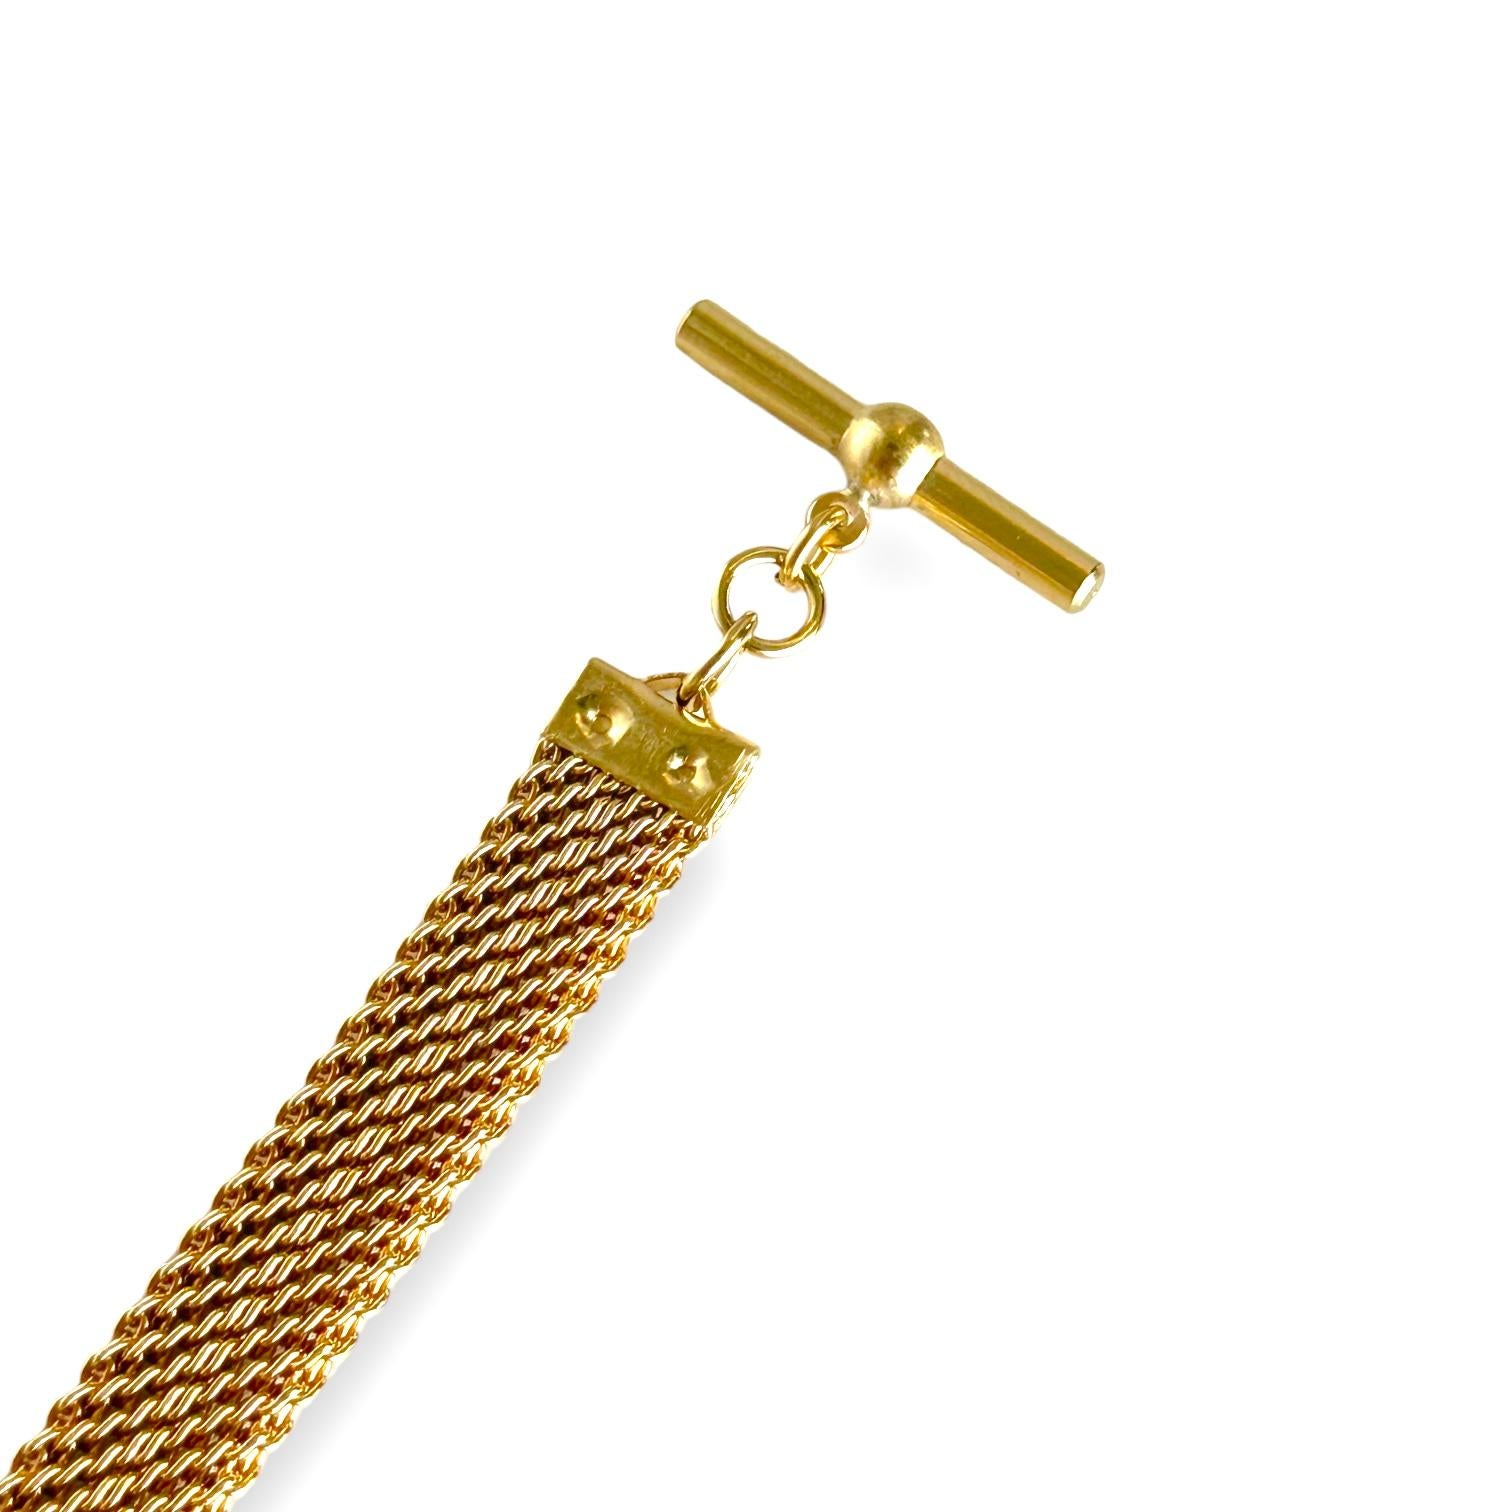 Vintage Victorian mesh bracelet in yellow gold color.
Bracelet length: 6.25 inches/16 cm.
Chain width: 8.83 mm.
Metal: copper.
Total weight 17.20 grams.